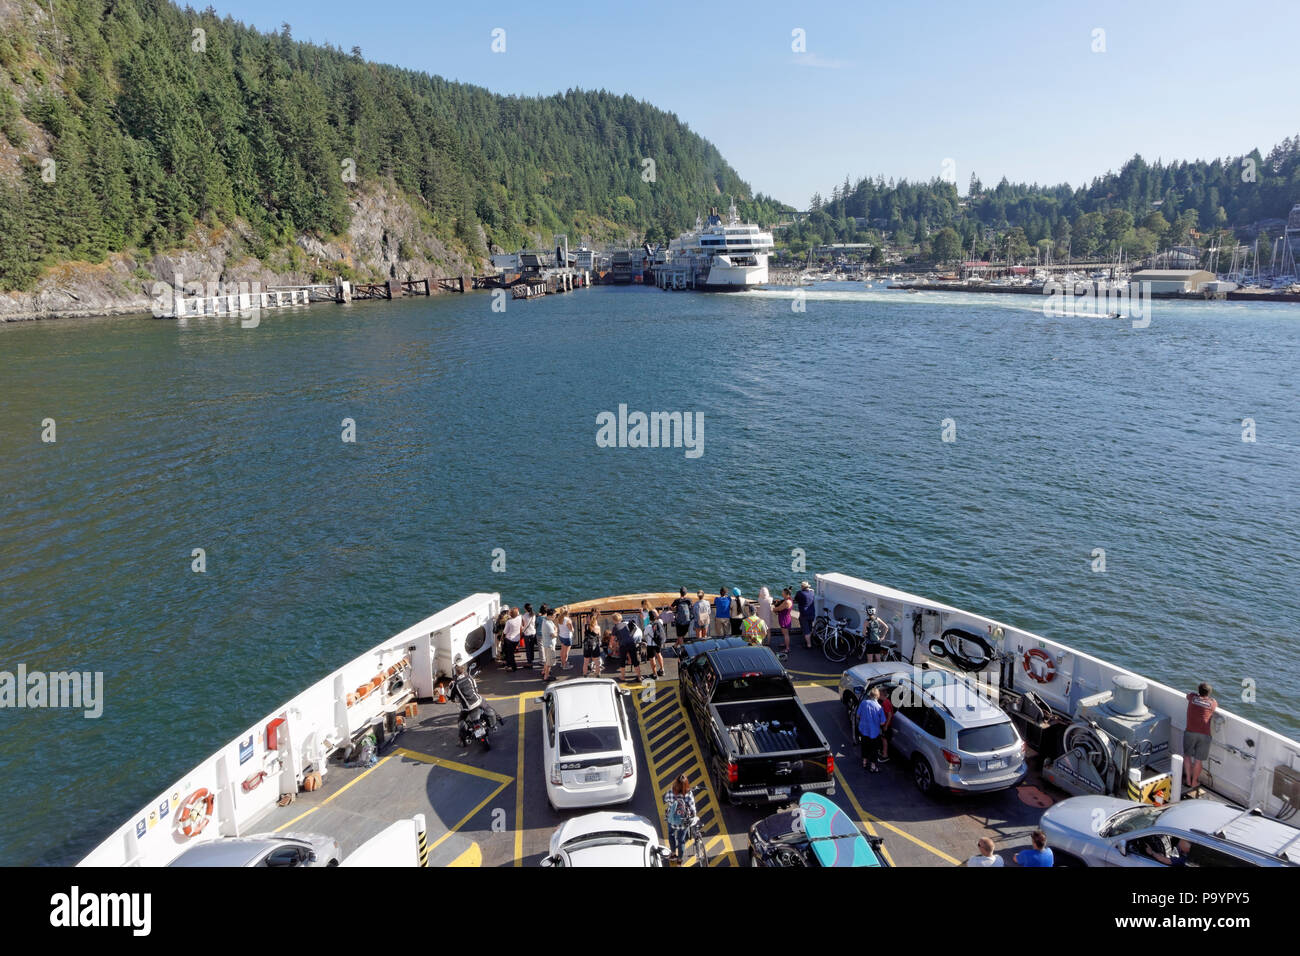 View of the Horseshoe Bay ferry terminal from the Bowen Island ferry, West Vancouver, British Columbia, Canada Stock Photo